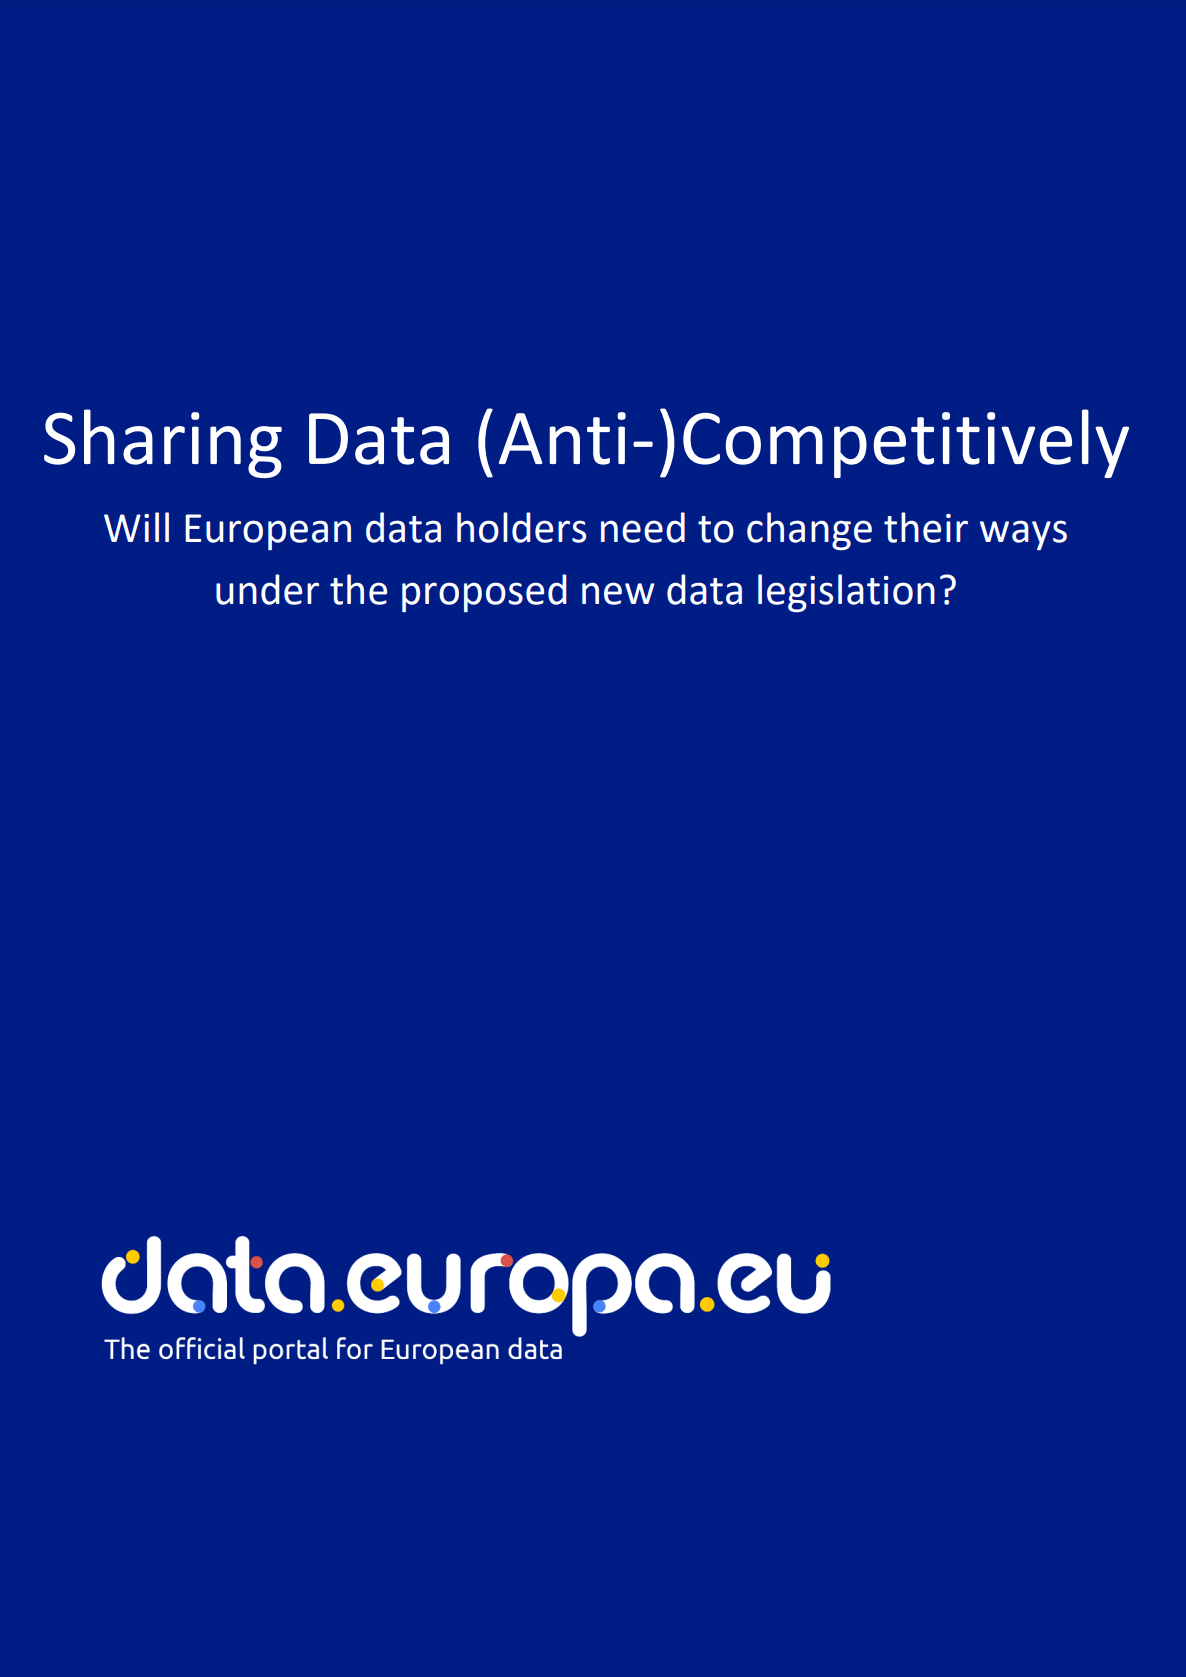 Sharing data (anti-)competitively - Will European data holders need to change their ways under the proposed new data legislation?